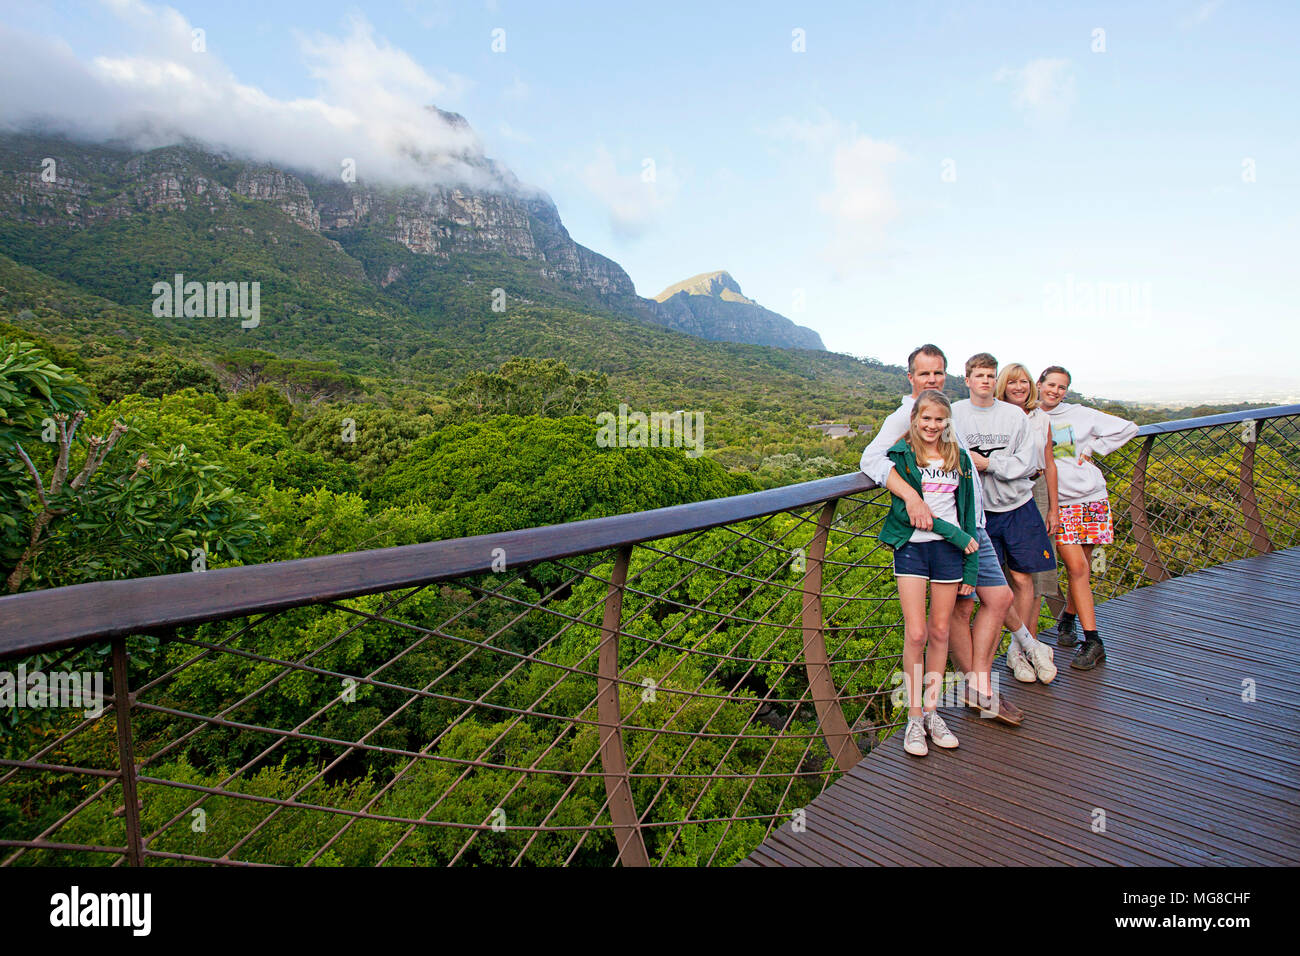 Family of five on the 'Boomslang' with tree canopy in background Stock Photo